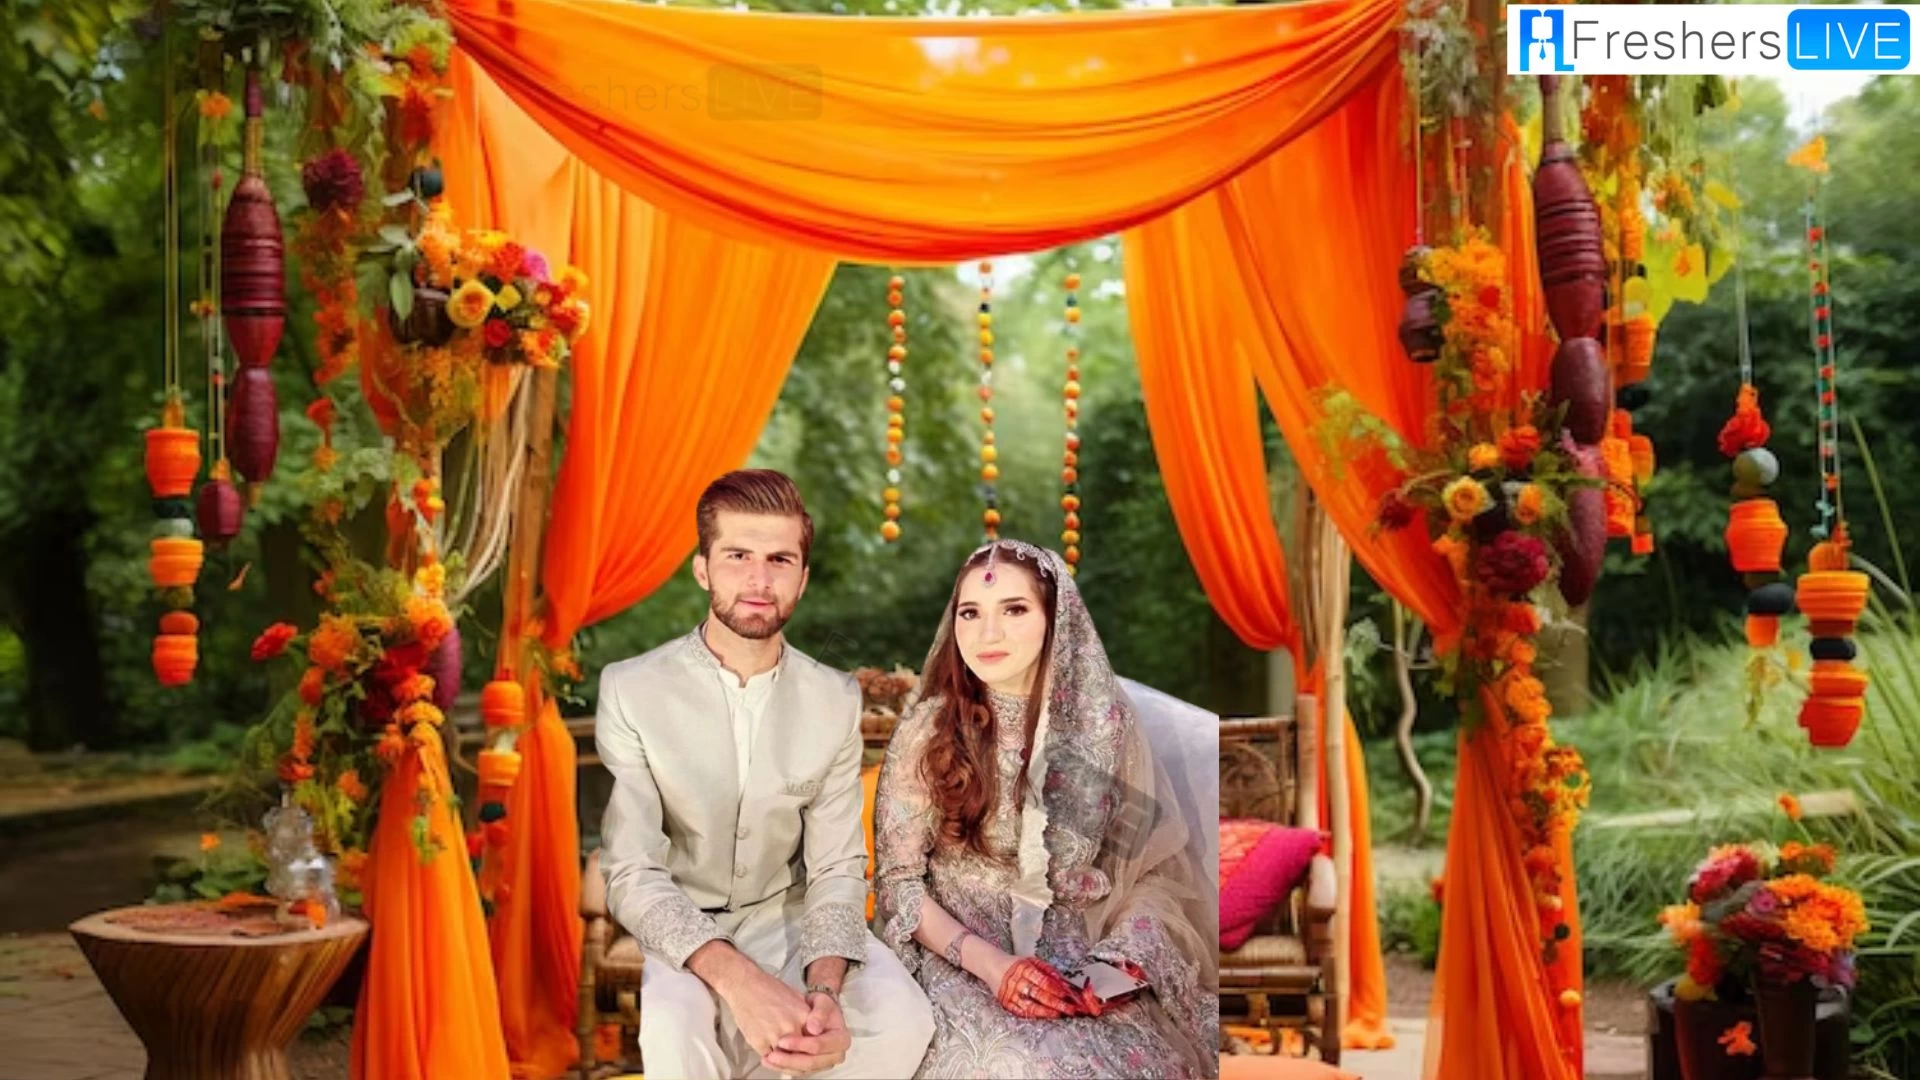 Is Shaheen Shah Afridi Married? Who is Shaheen Shah Afridi Married to? Who is Ansha Afridi?